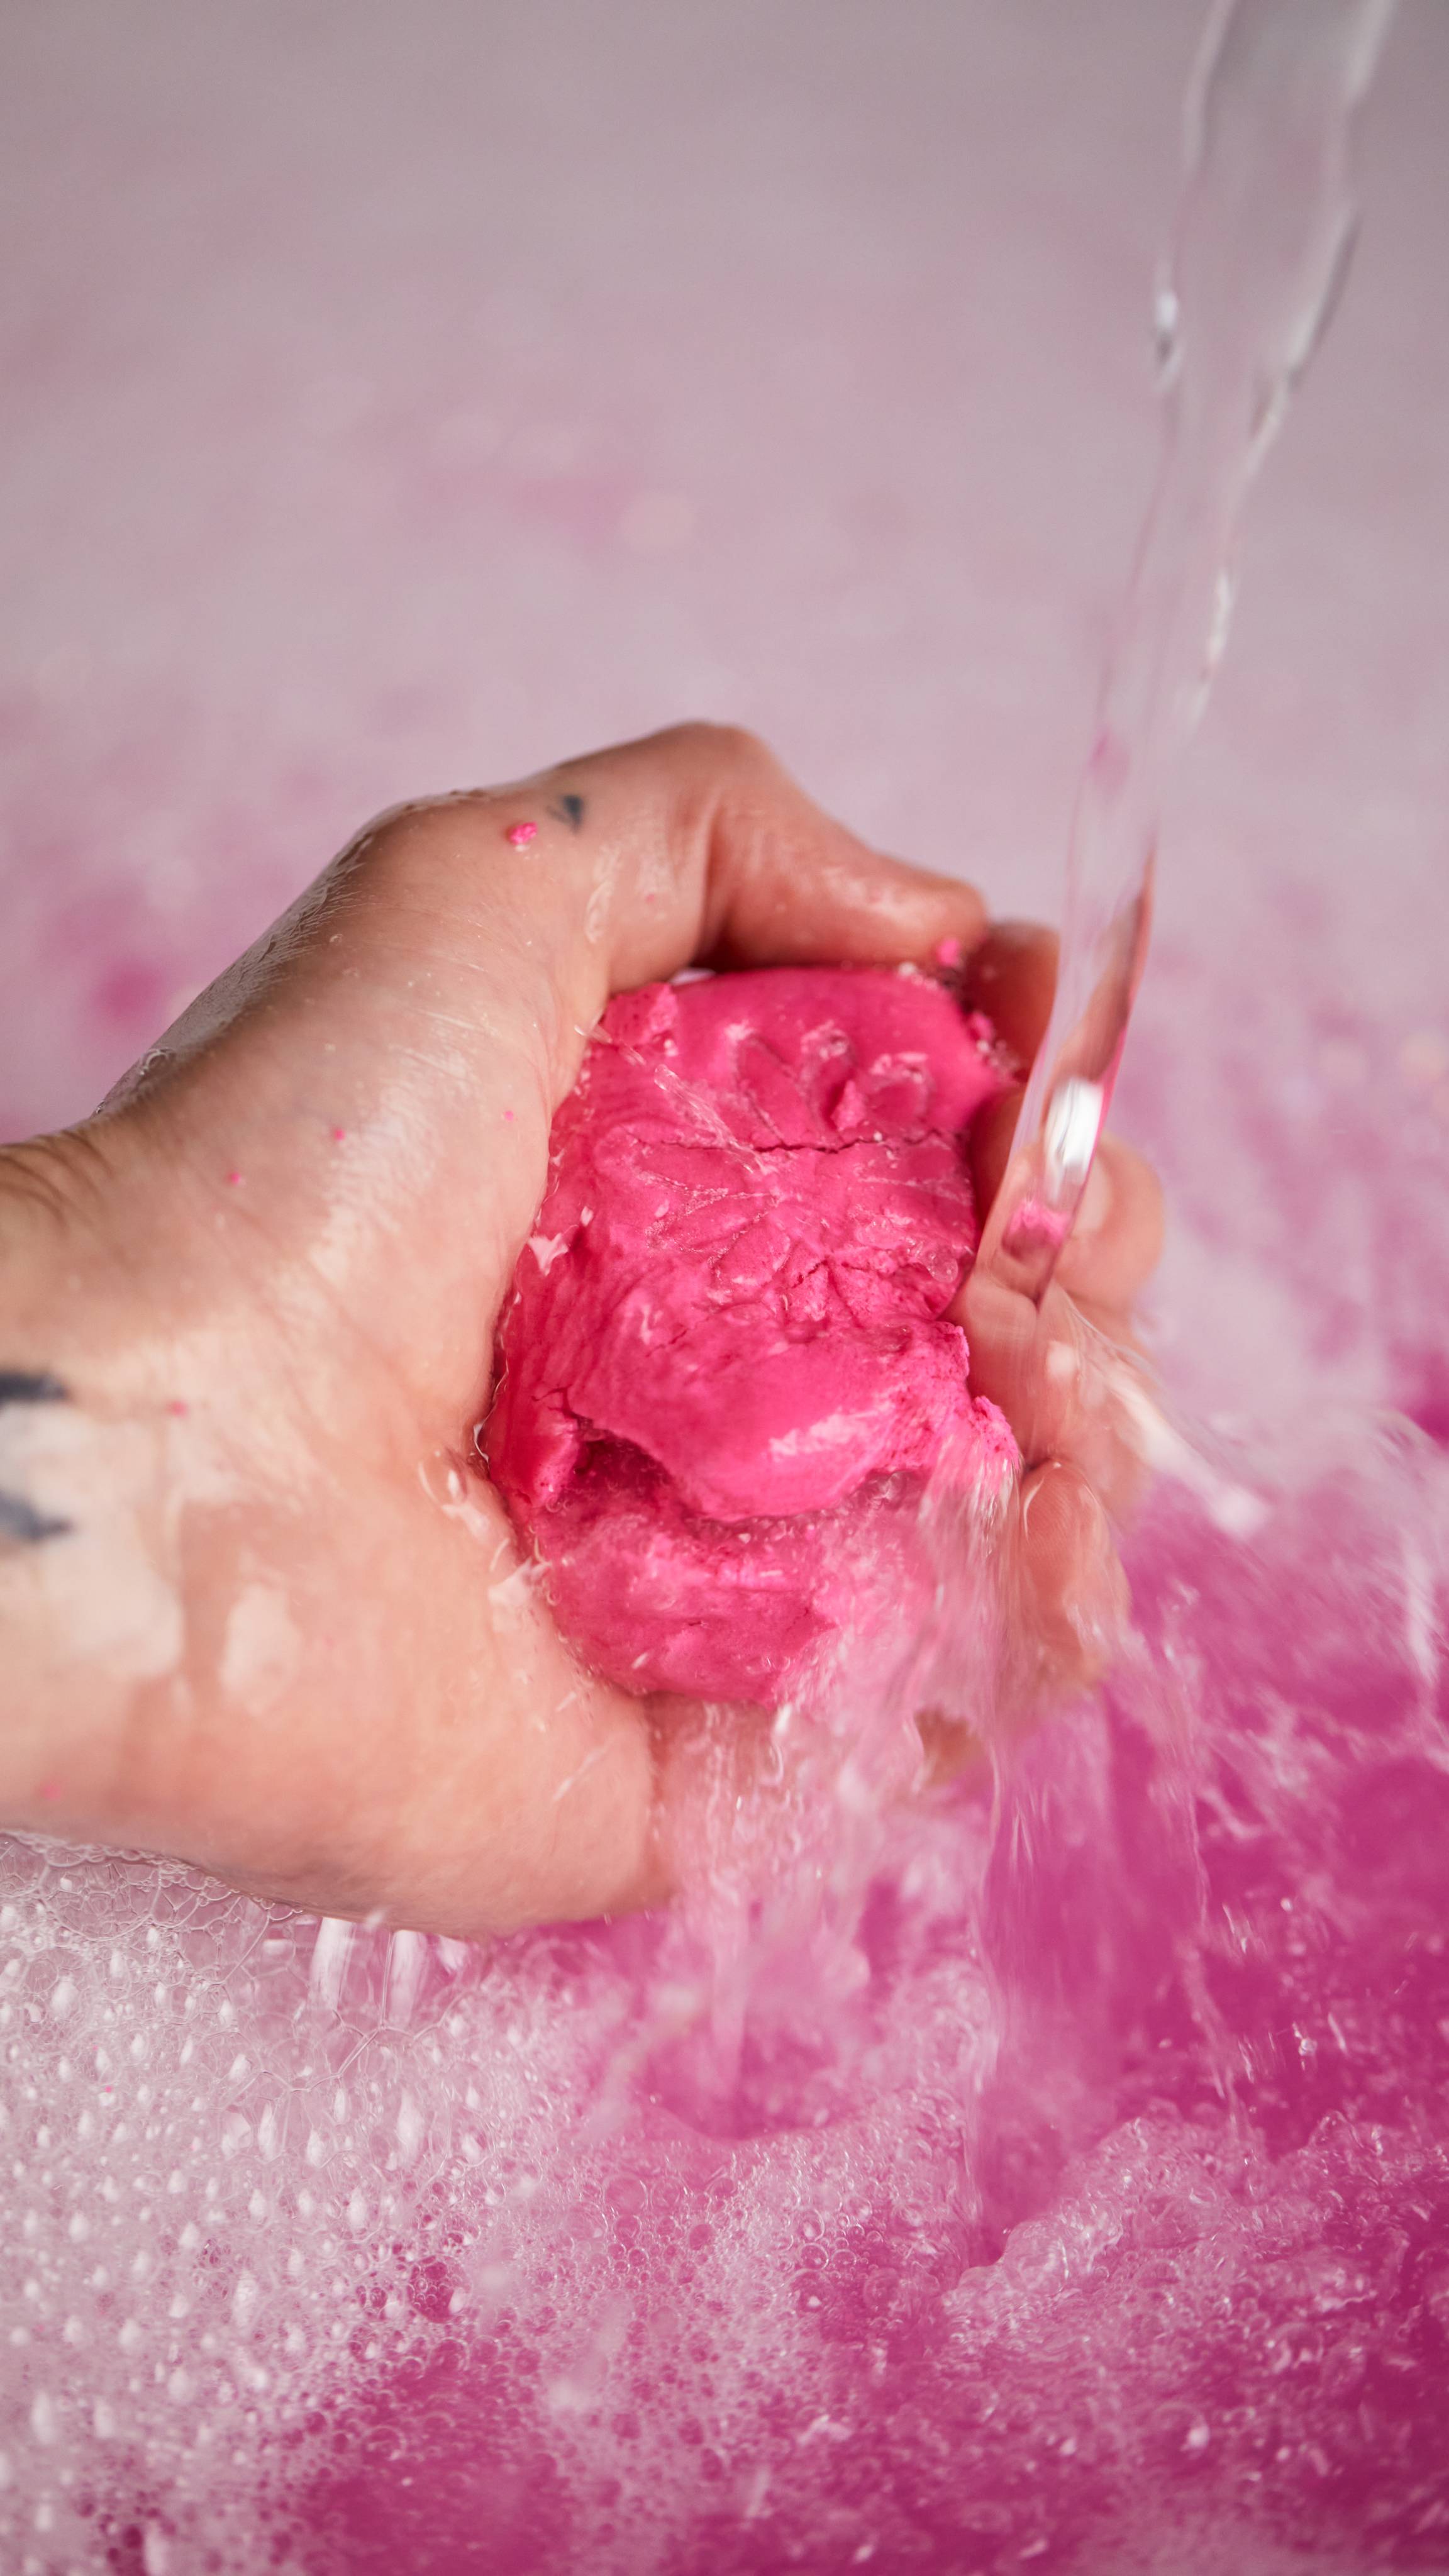 Image shows the model gently crumbling the pink bubble bar under running water in front of bubbly, pink bath water.